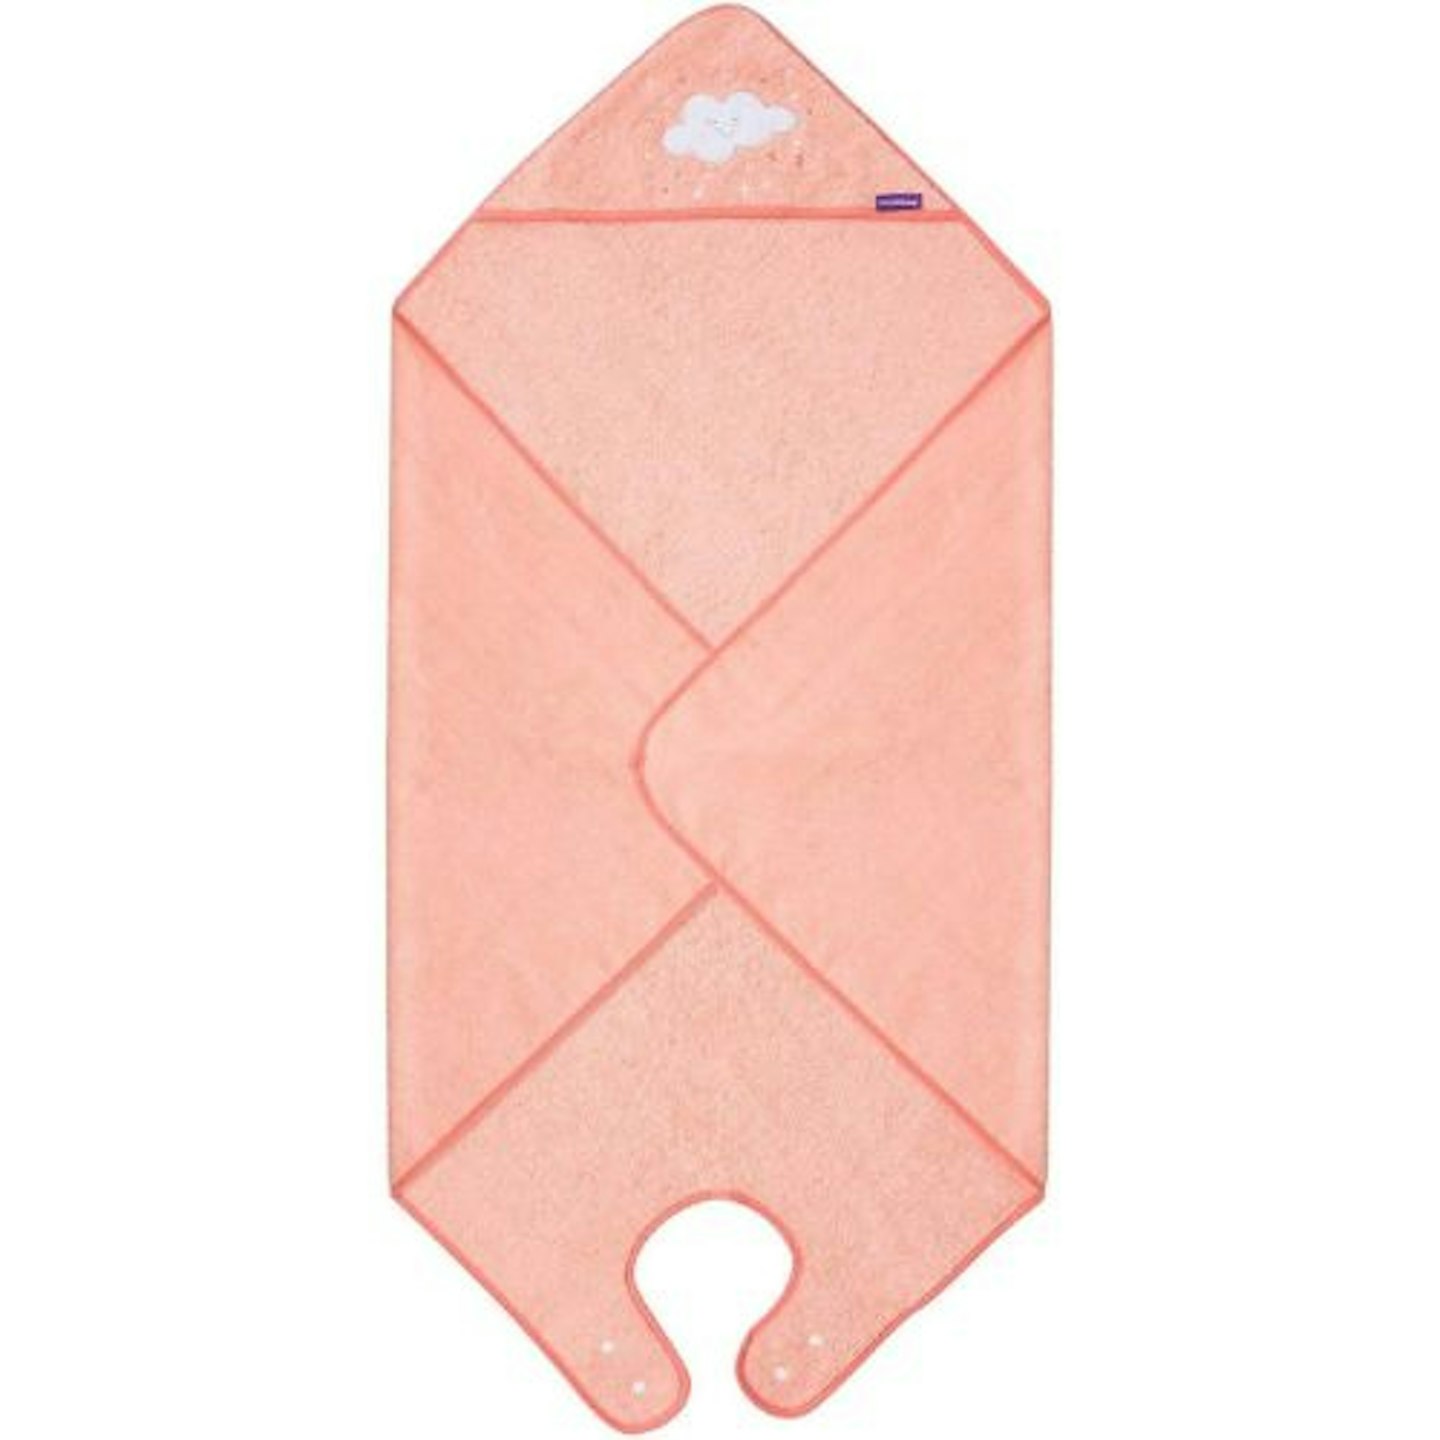 Best newborn gifts Clevamama Apron Baby Bath Towel with Hood